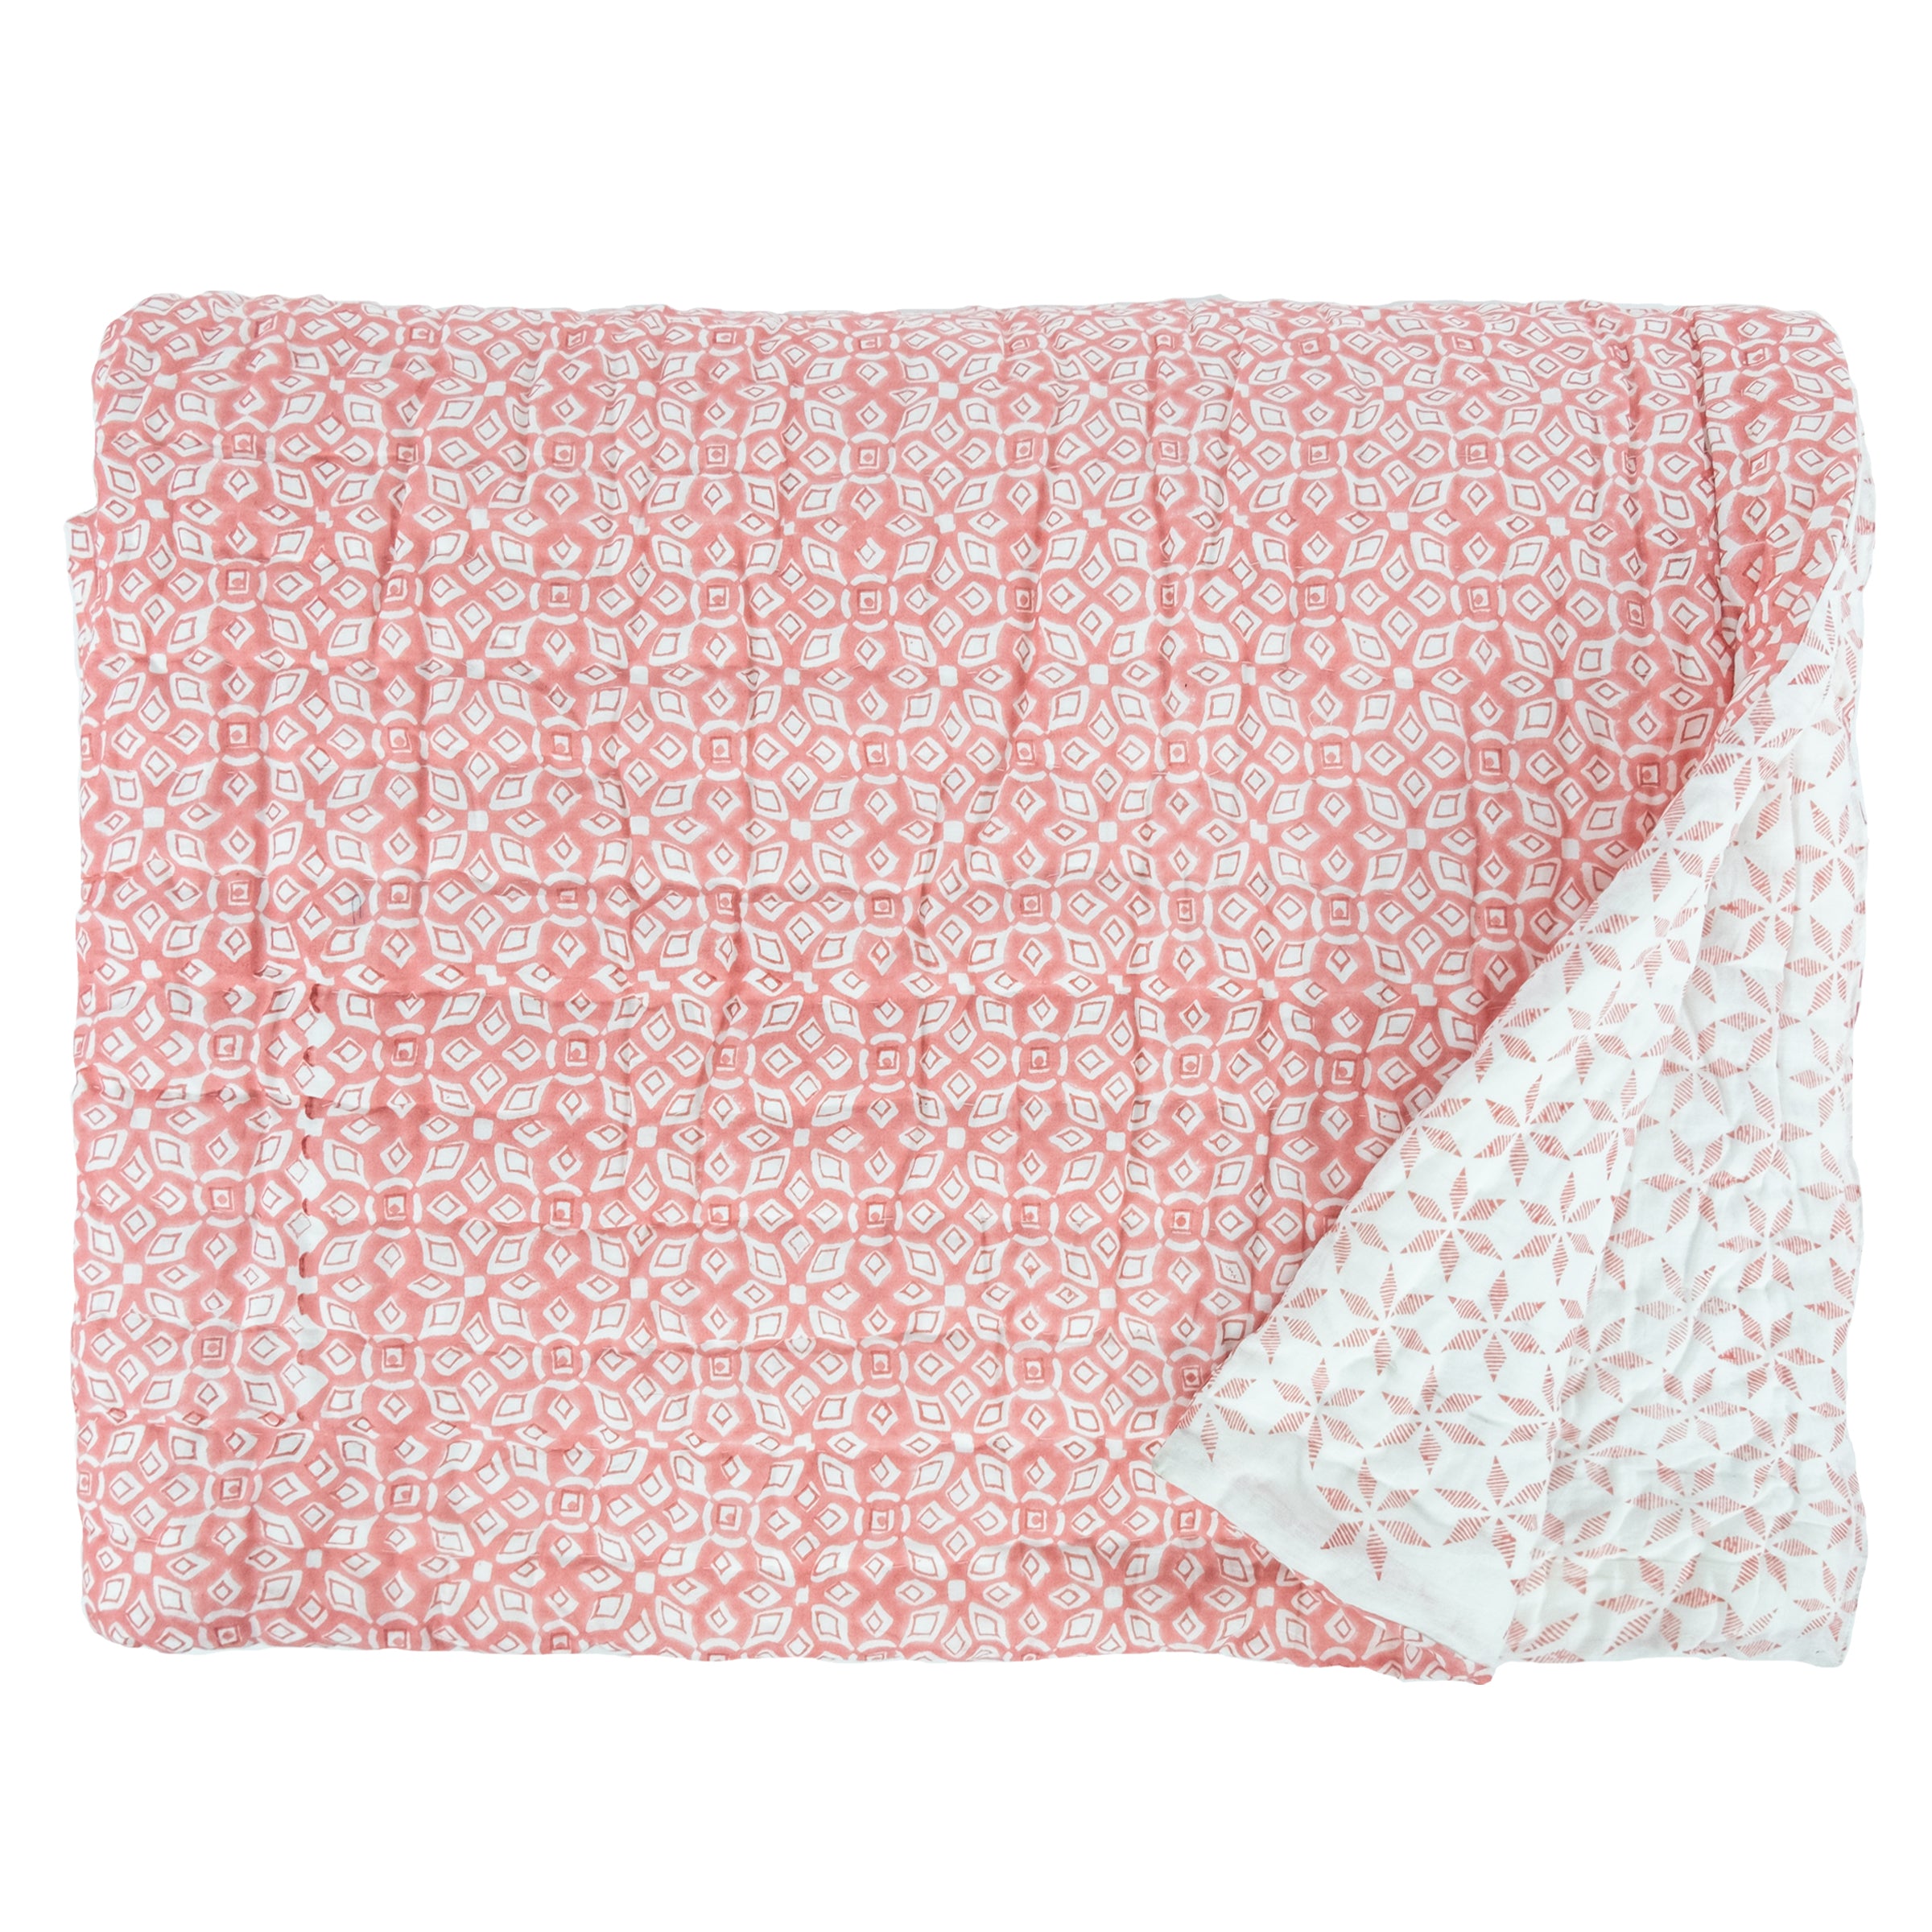 Lara Coral Quilt (Large, Small)